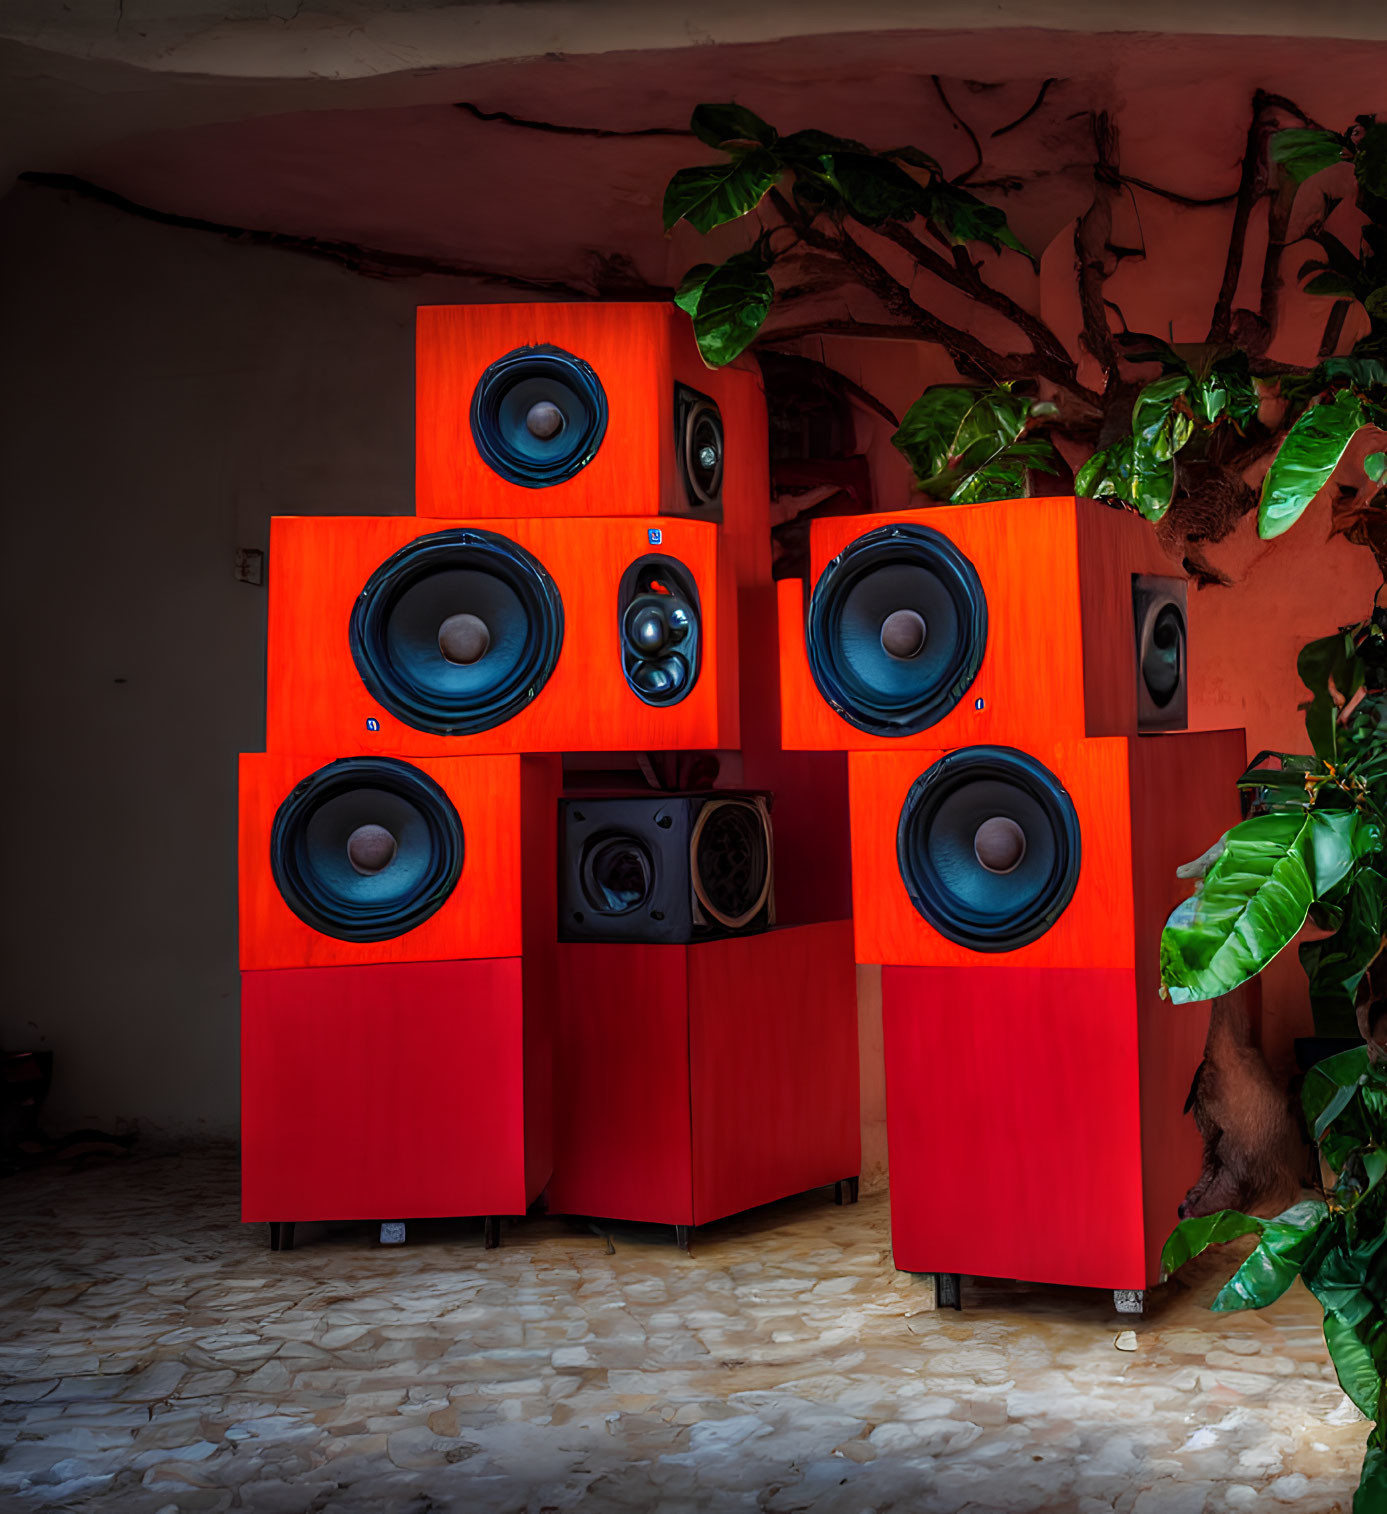 Vibrant Red Loudspeakers in Pyramid Pattern Against White Wall